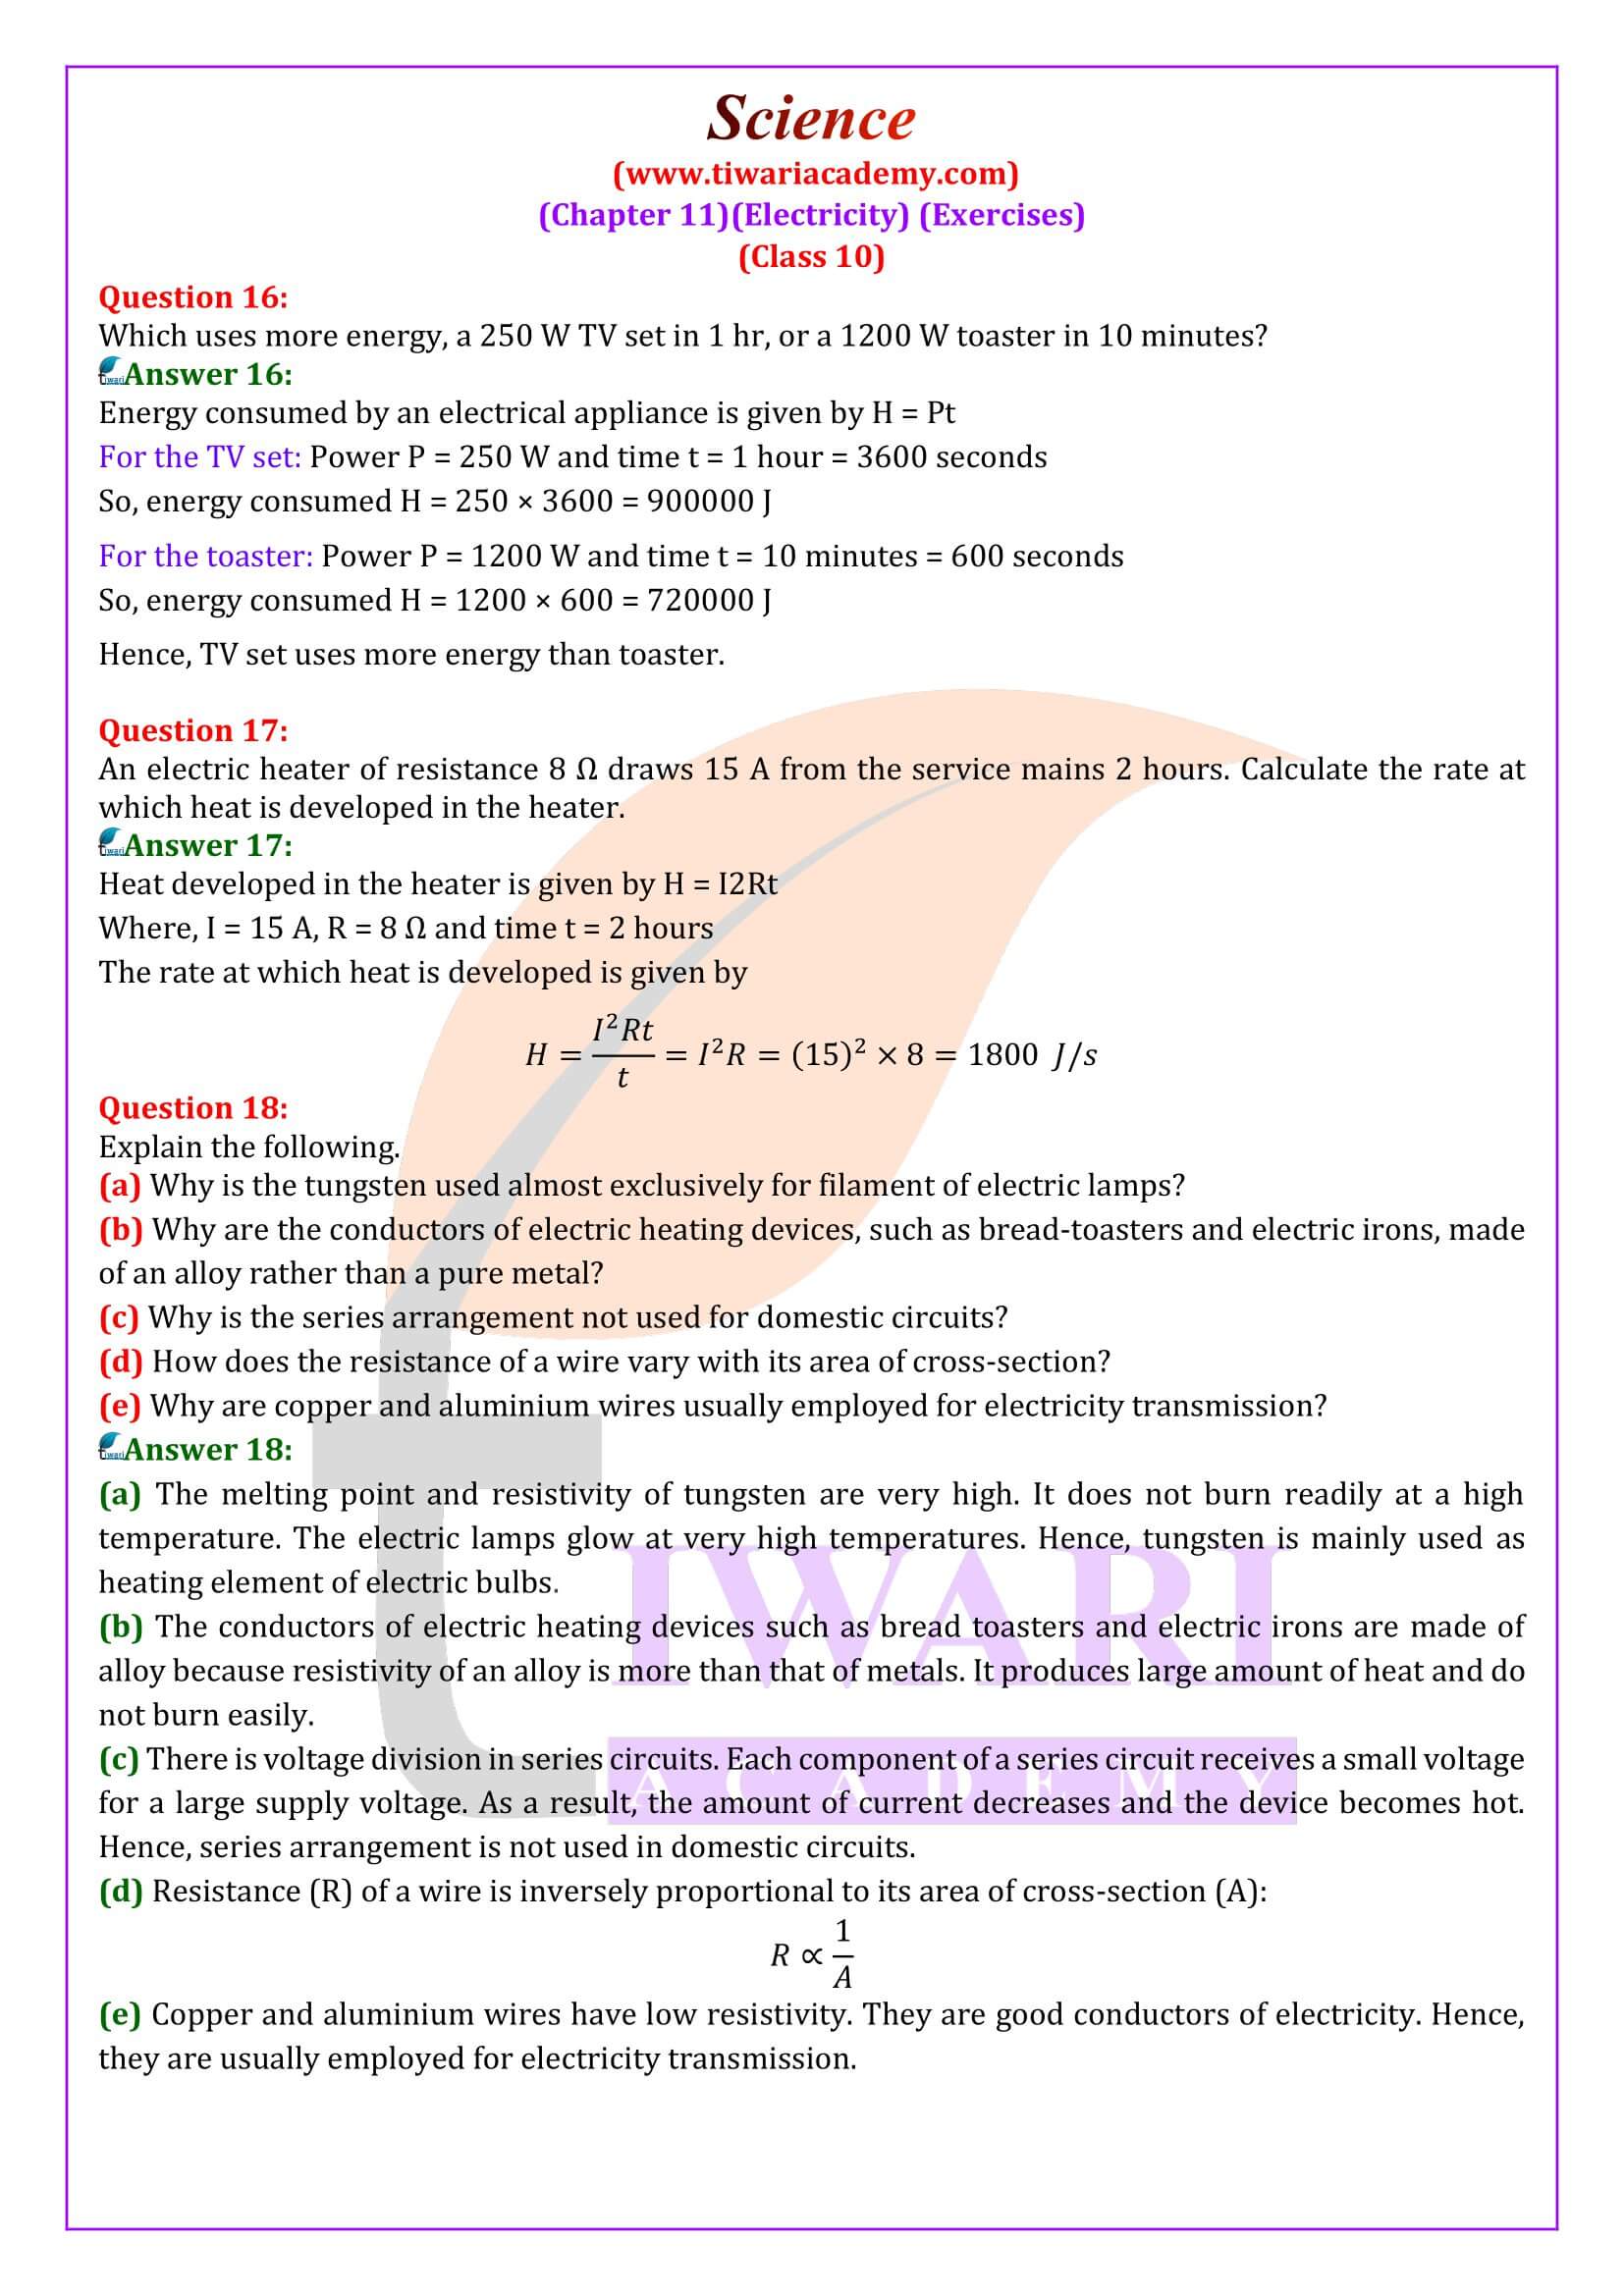 NCERT Solutions for Class 10 Science Chapter 11 Quesiton Answers